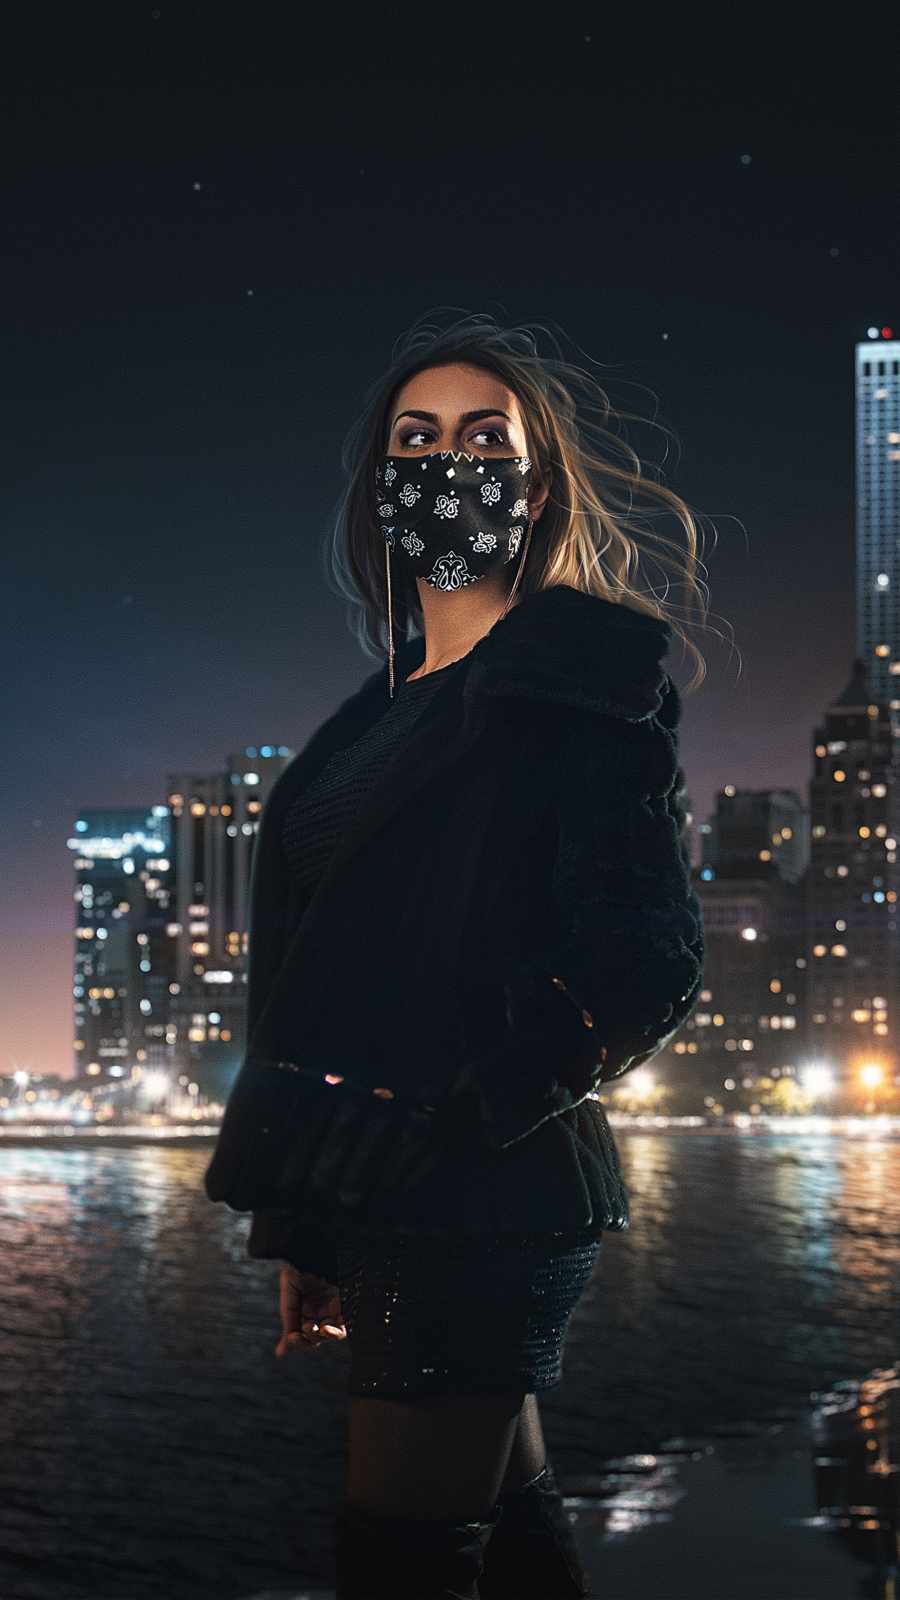 Masked Girl In Black IPhone Wallpaper - IPhone Wallpapers : iPhone  Wallpapers